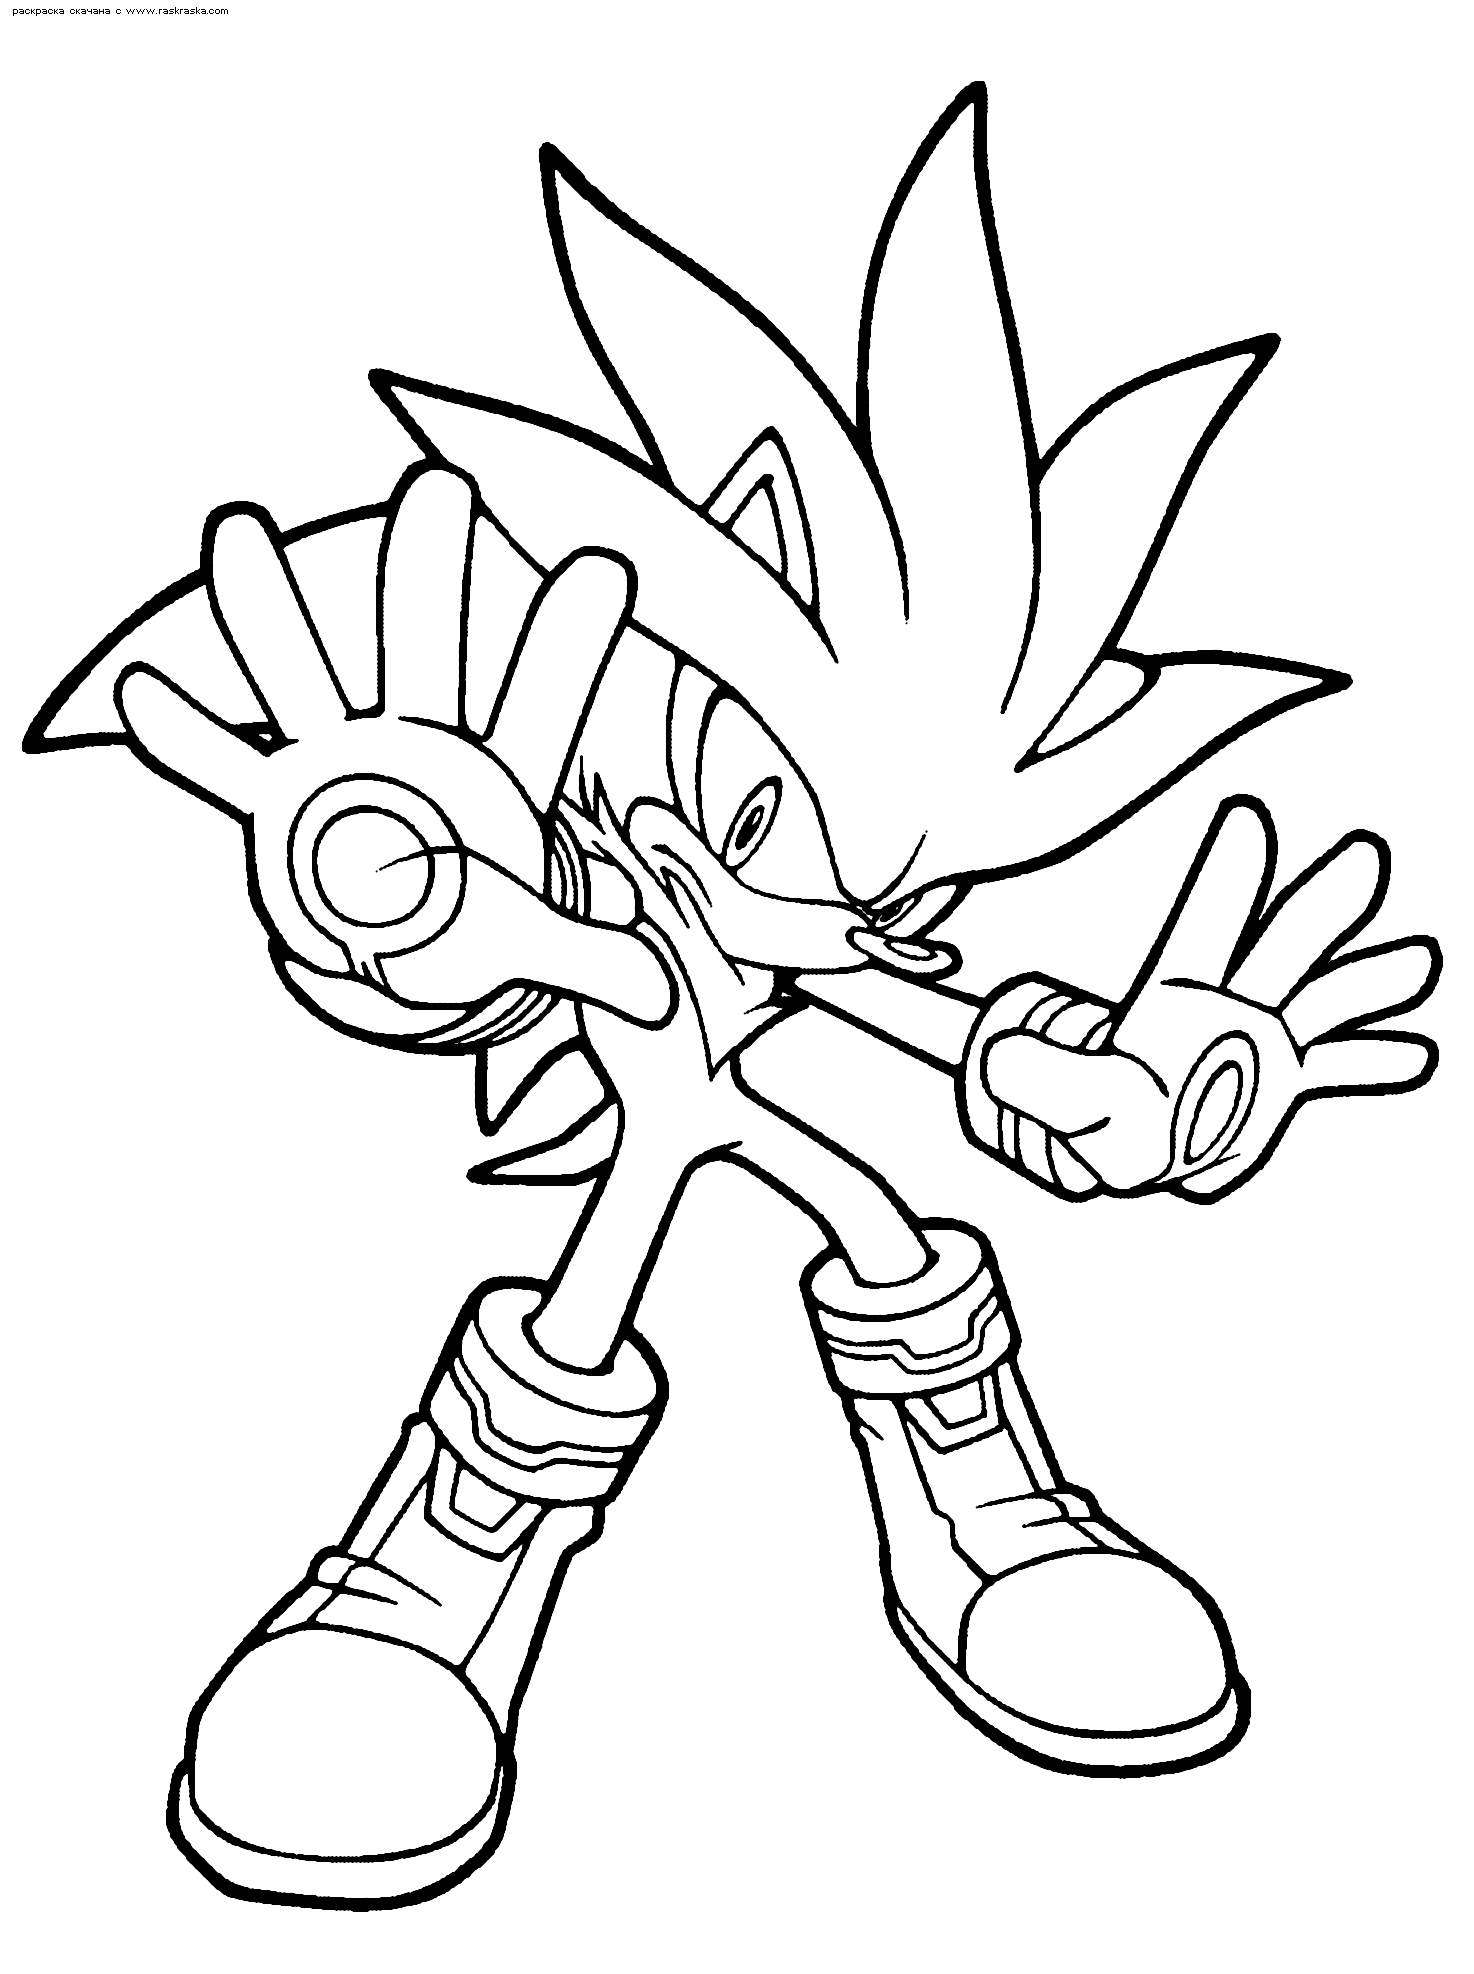 sonic-coloring-pages-13-coloringkids